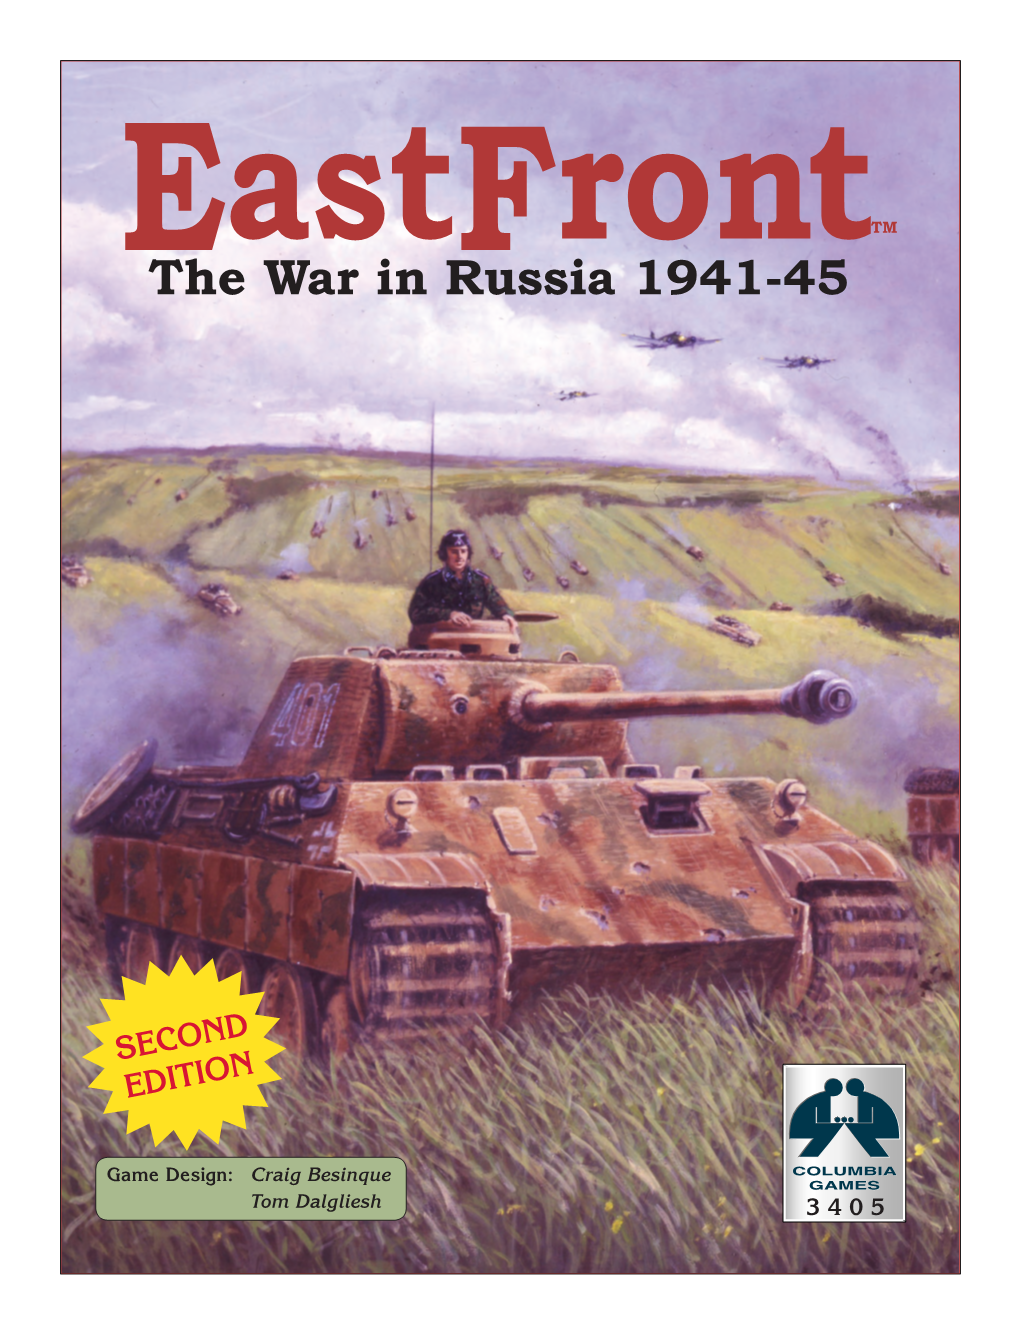 Eastfront the War in Russia 1941-45